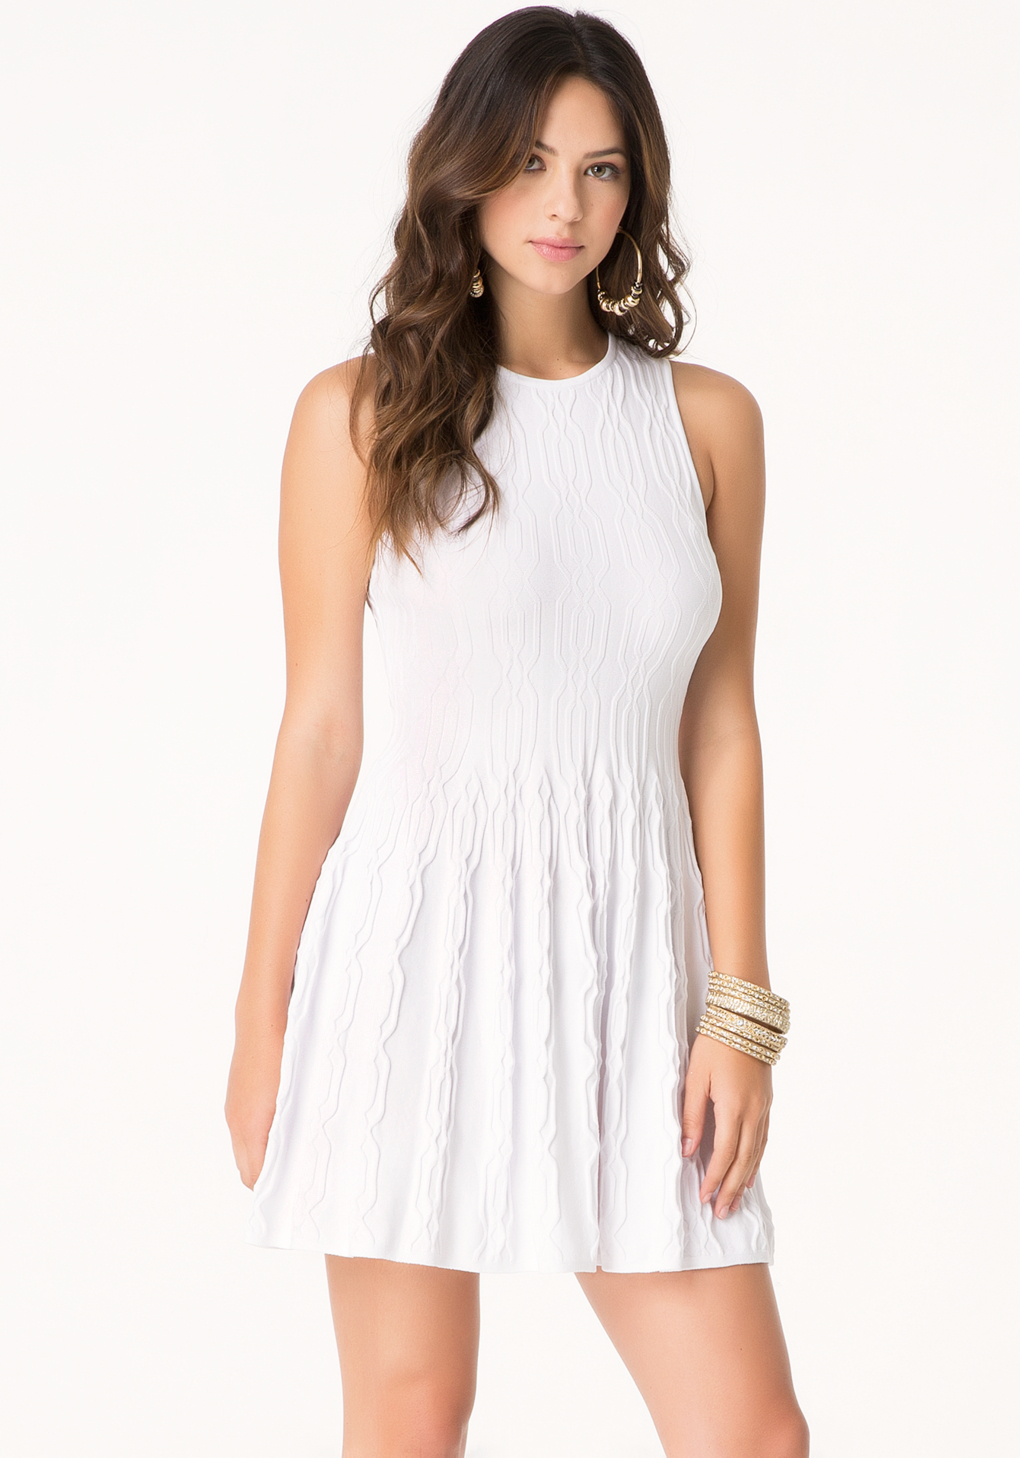 Lyst - Bebe Petite Cable Sweater Dress in White